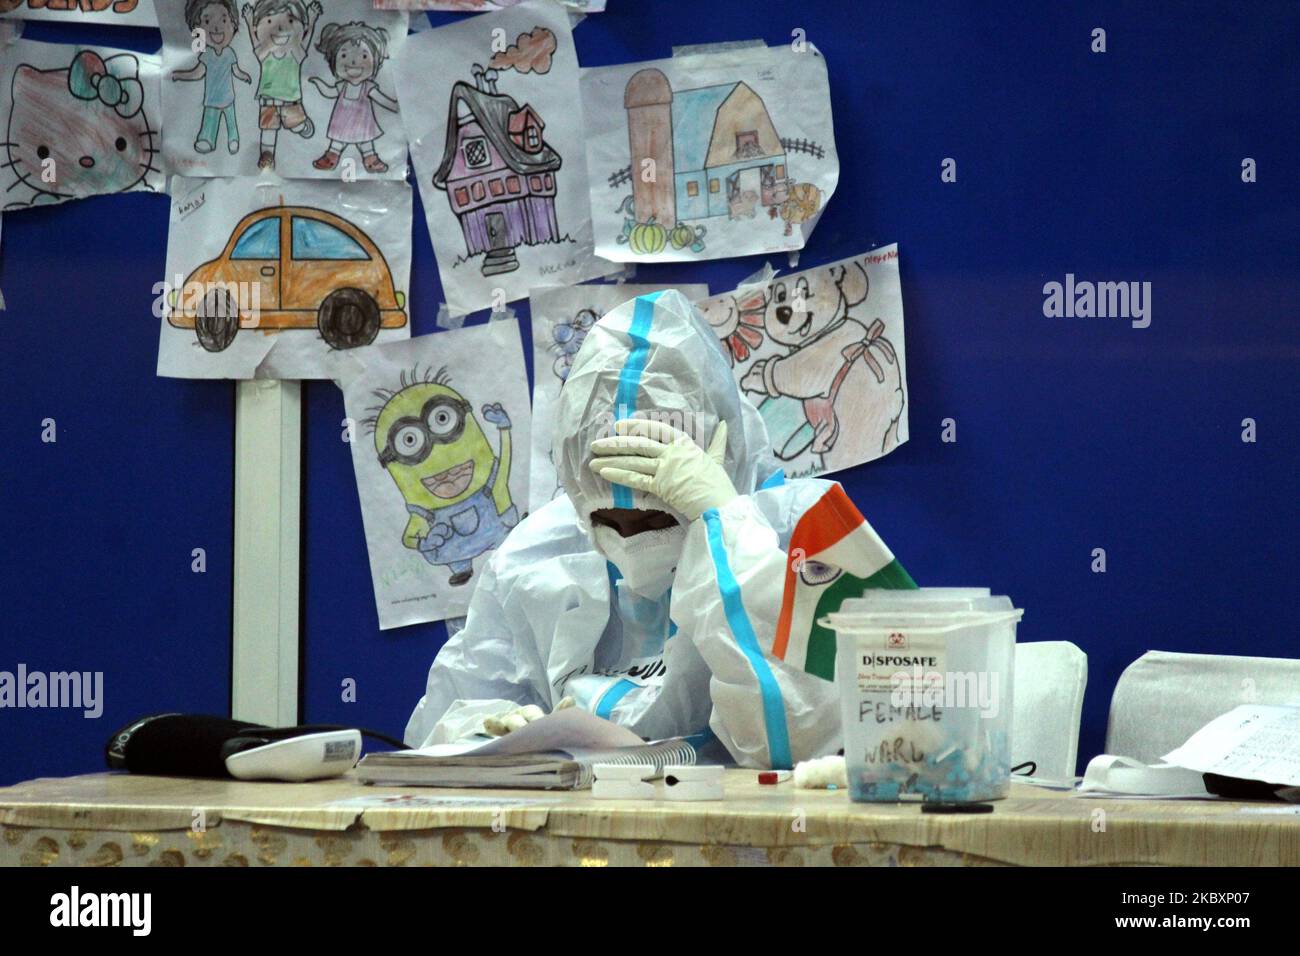 A doctor covered in Personal Protective Equipment (PPE) kit, examines the patient inside female ward at Covid care facility inside Commonwealth Games Village Sports Complex, in New Delhi, India on August 28, 2020. India's Covid tally rose to 3,387,500 with 77,266 new cases in 24 hours. The death toll was recorded at 61,529, as per latest figures released by the Ministry of Health and Family Welfare. (Photo by Mayank Makhija/NurPhoto) Stock Photo